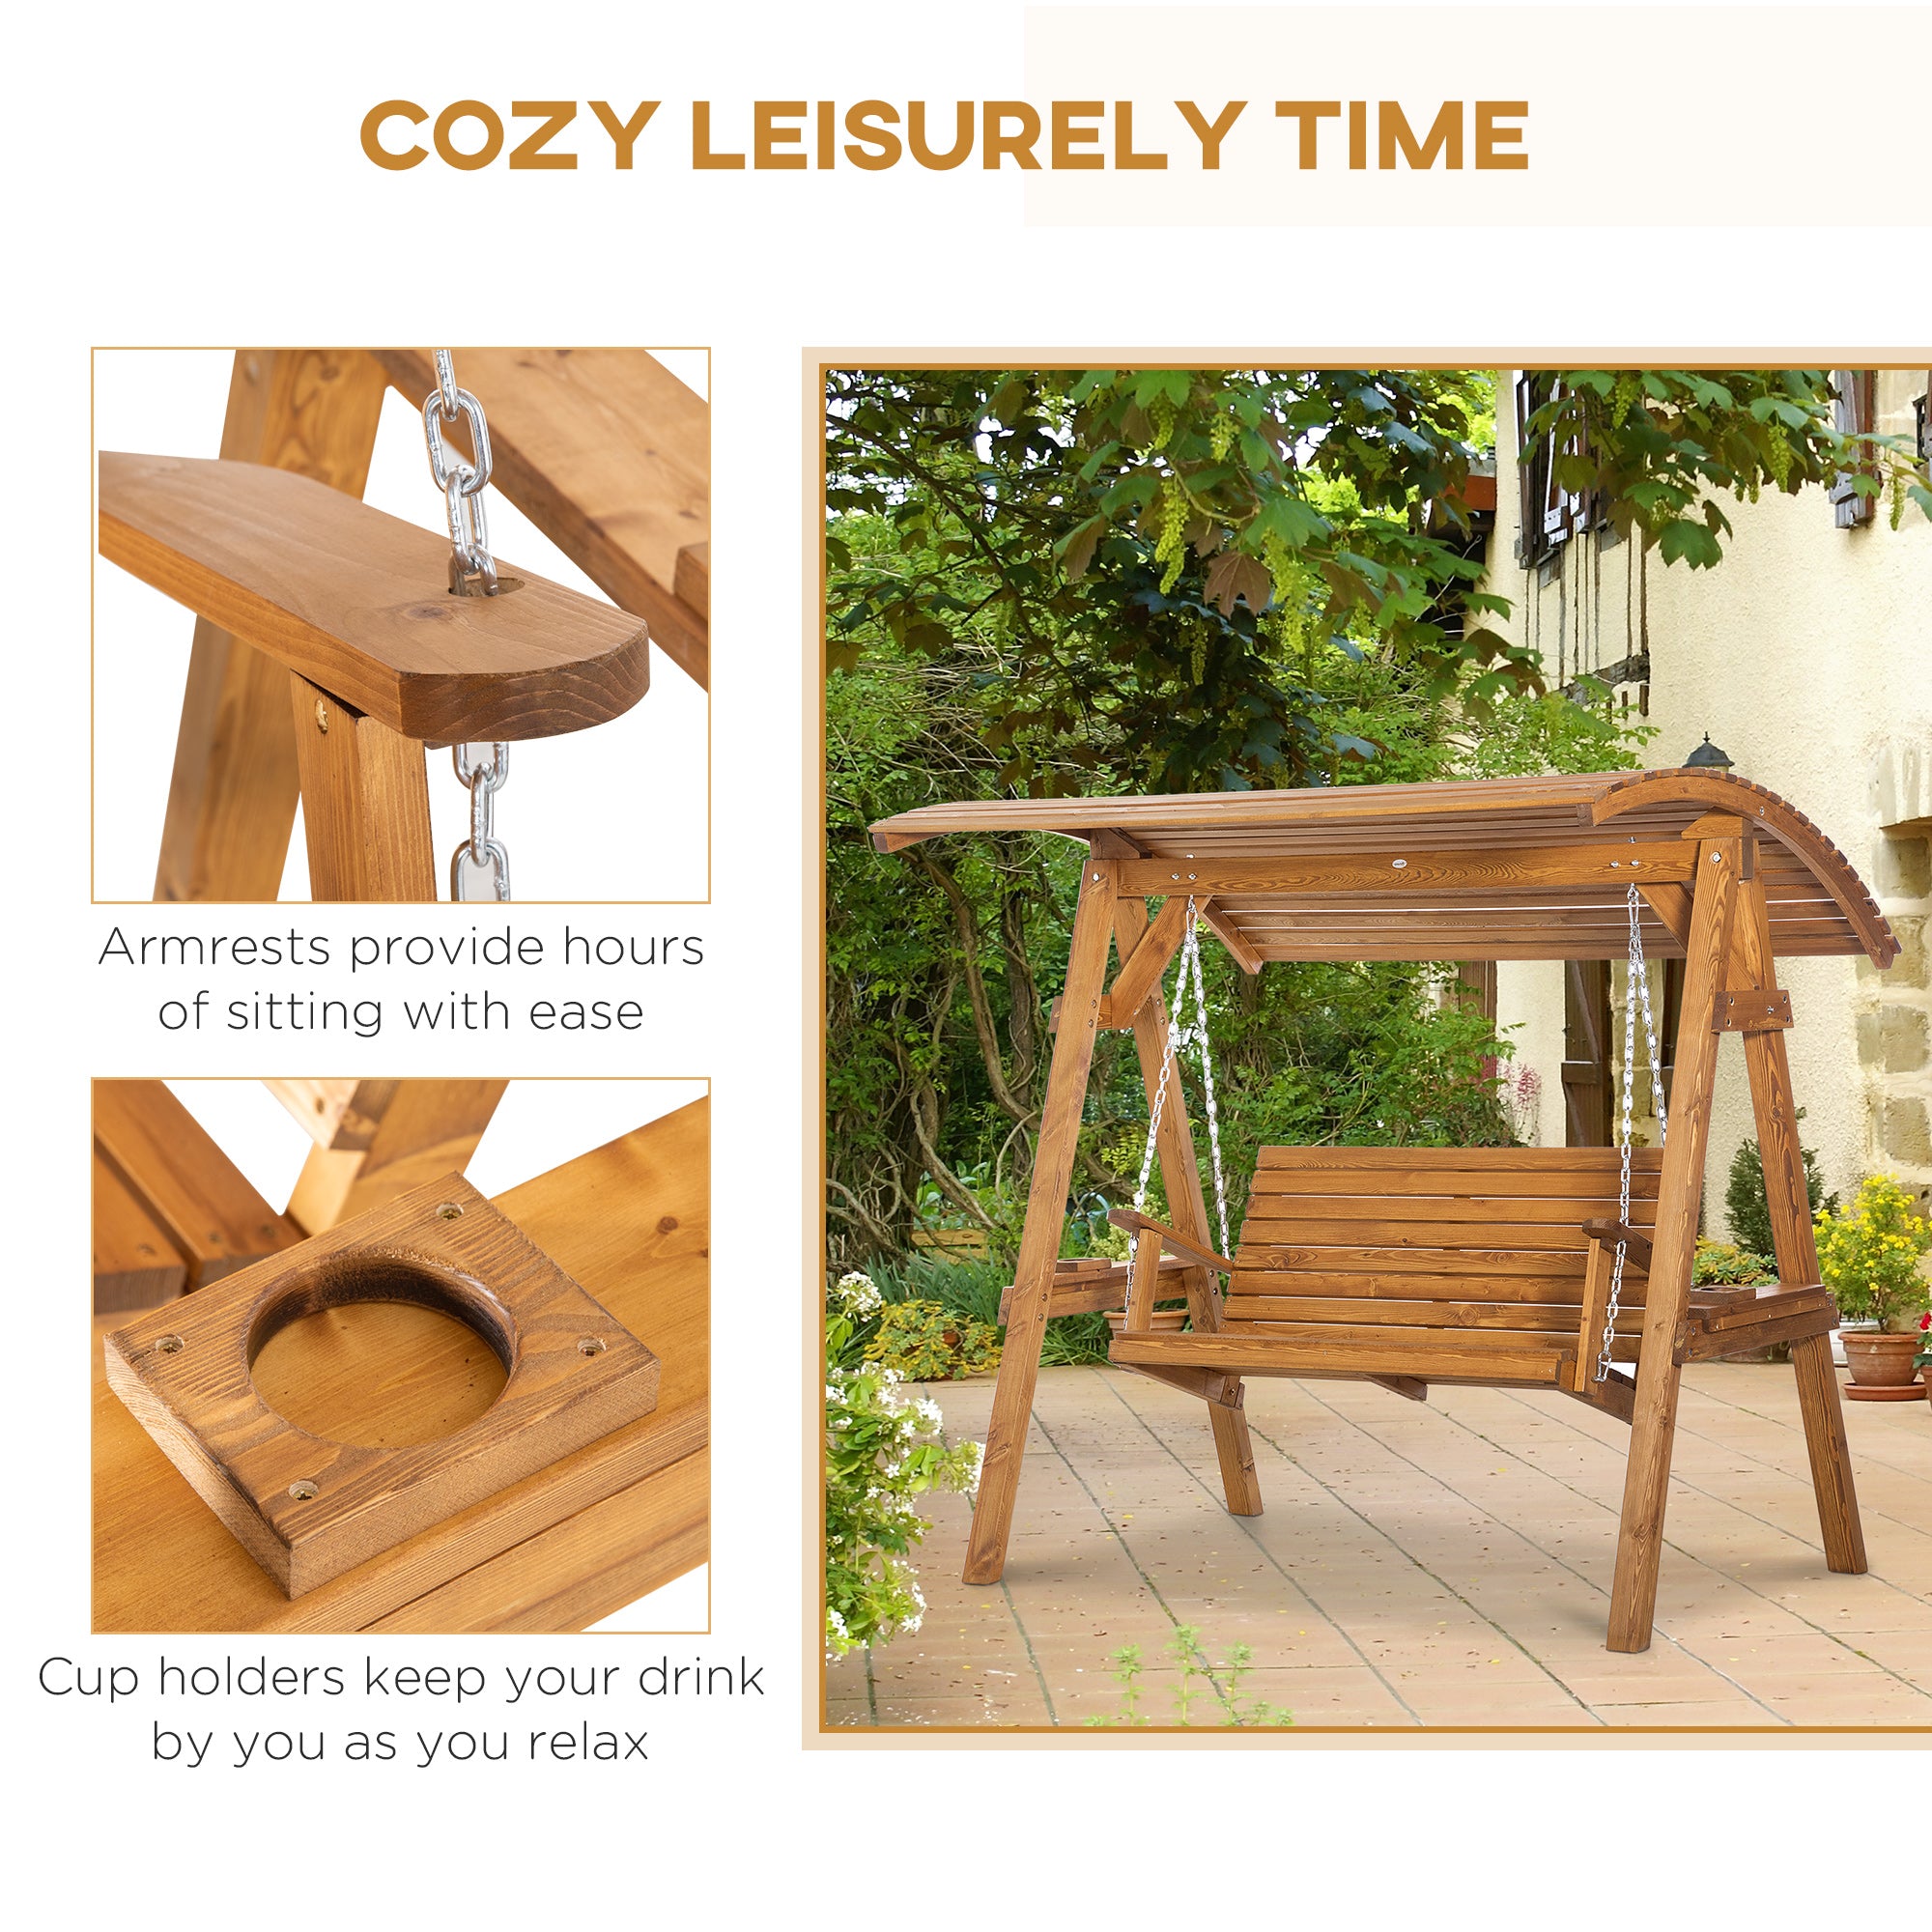 Outsunny 2 Seater Garden Swing Chair, Outdoor Canopy Swing Bench with Adjustable Shade and Solid Wood Frame